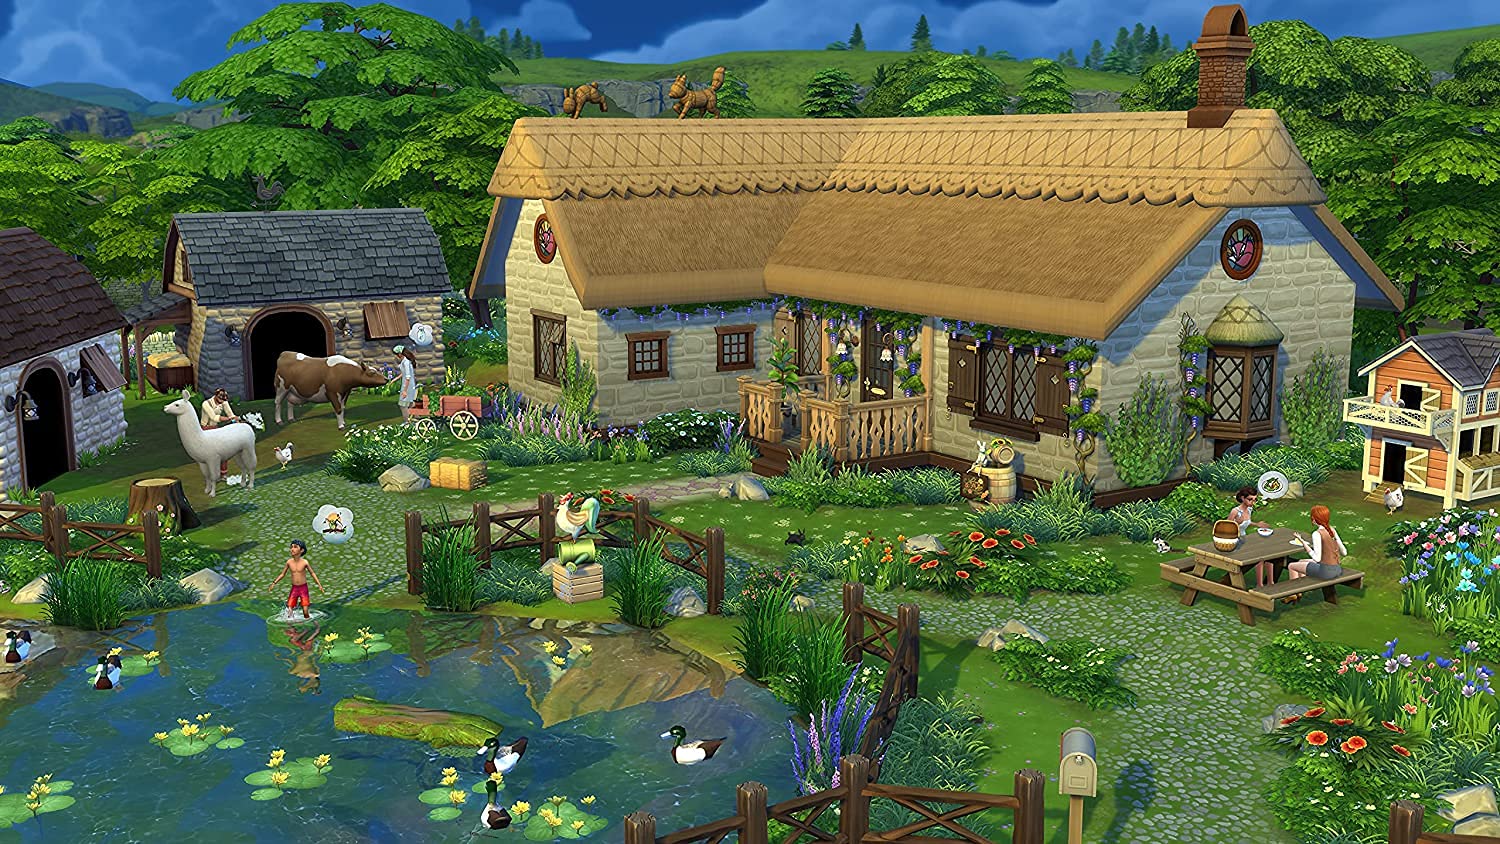 The Sims 4 - Cottage Living - Origin PC [Online Game Code]